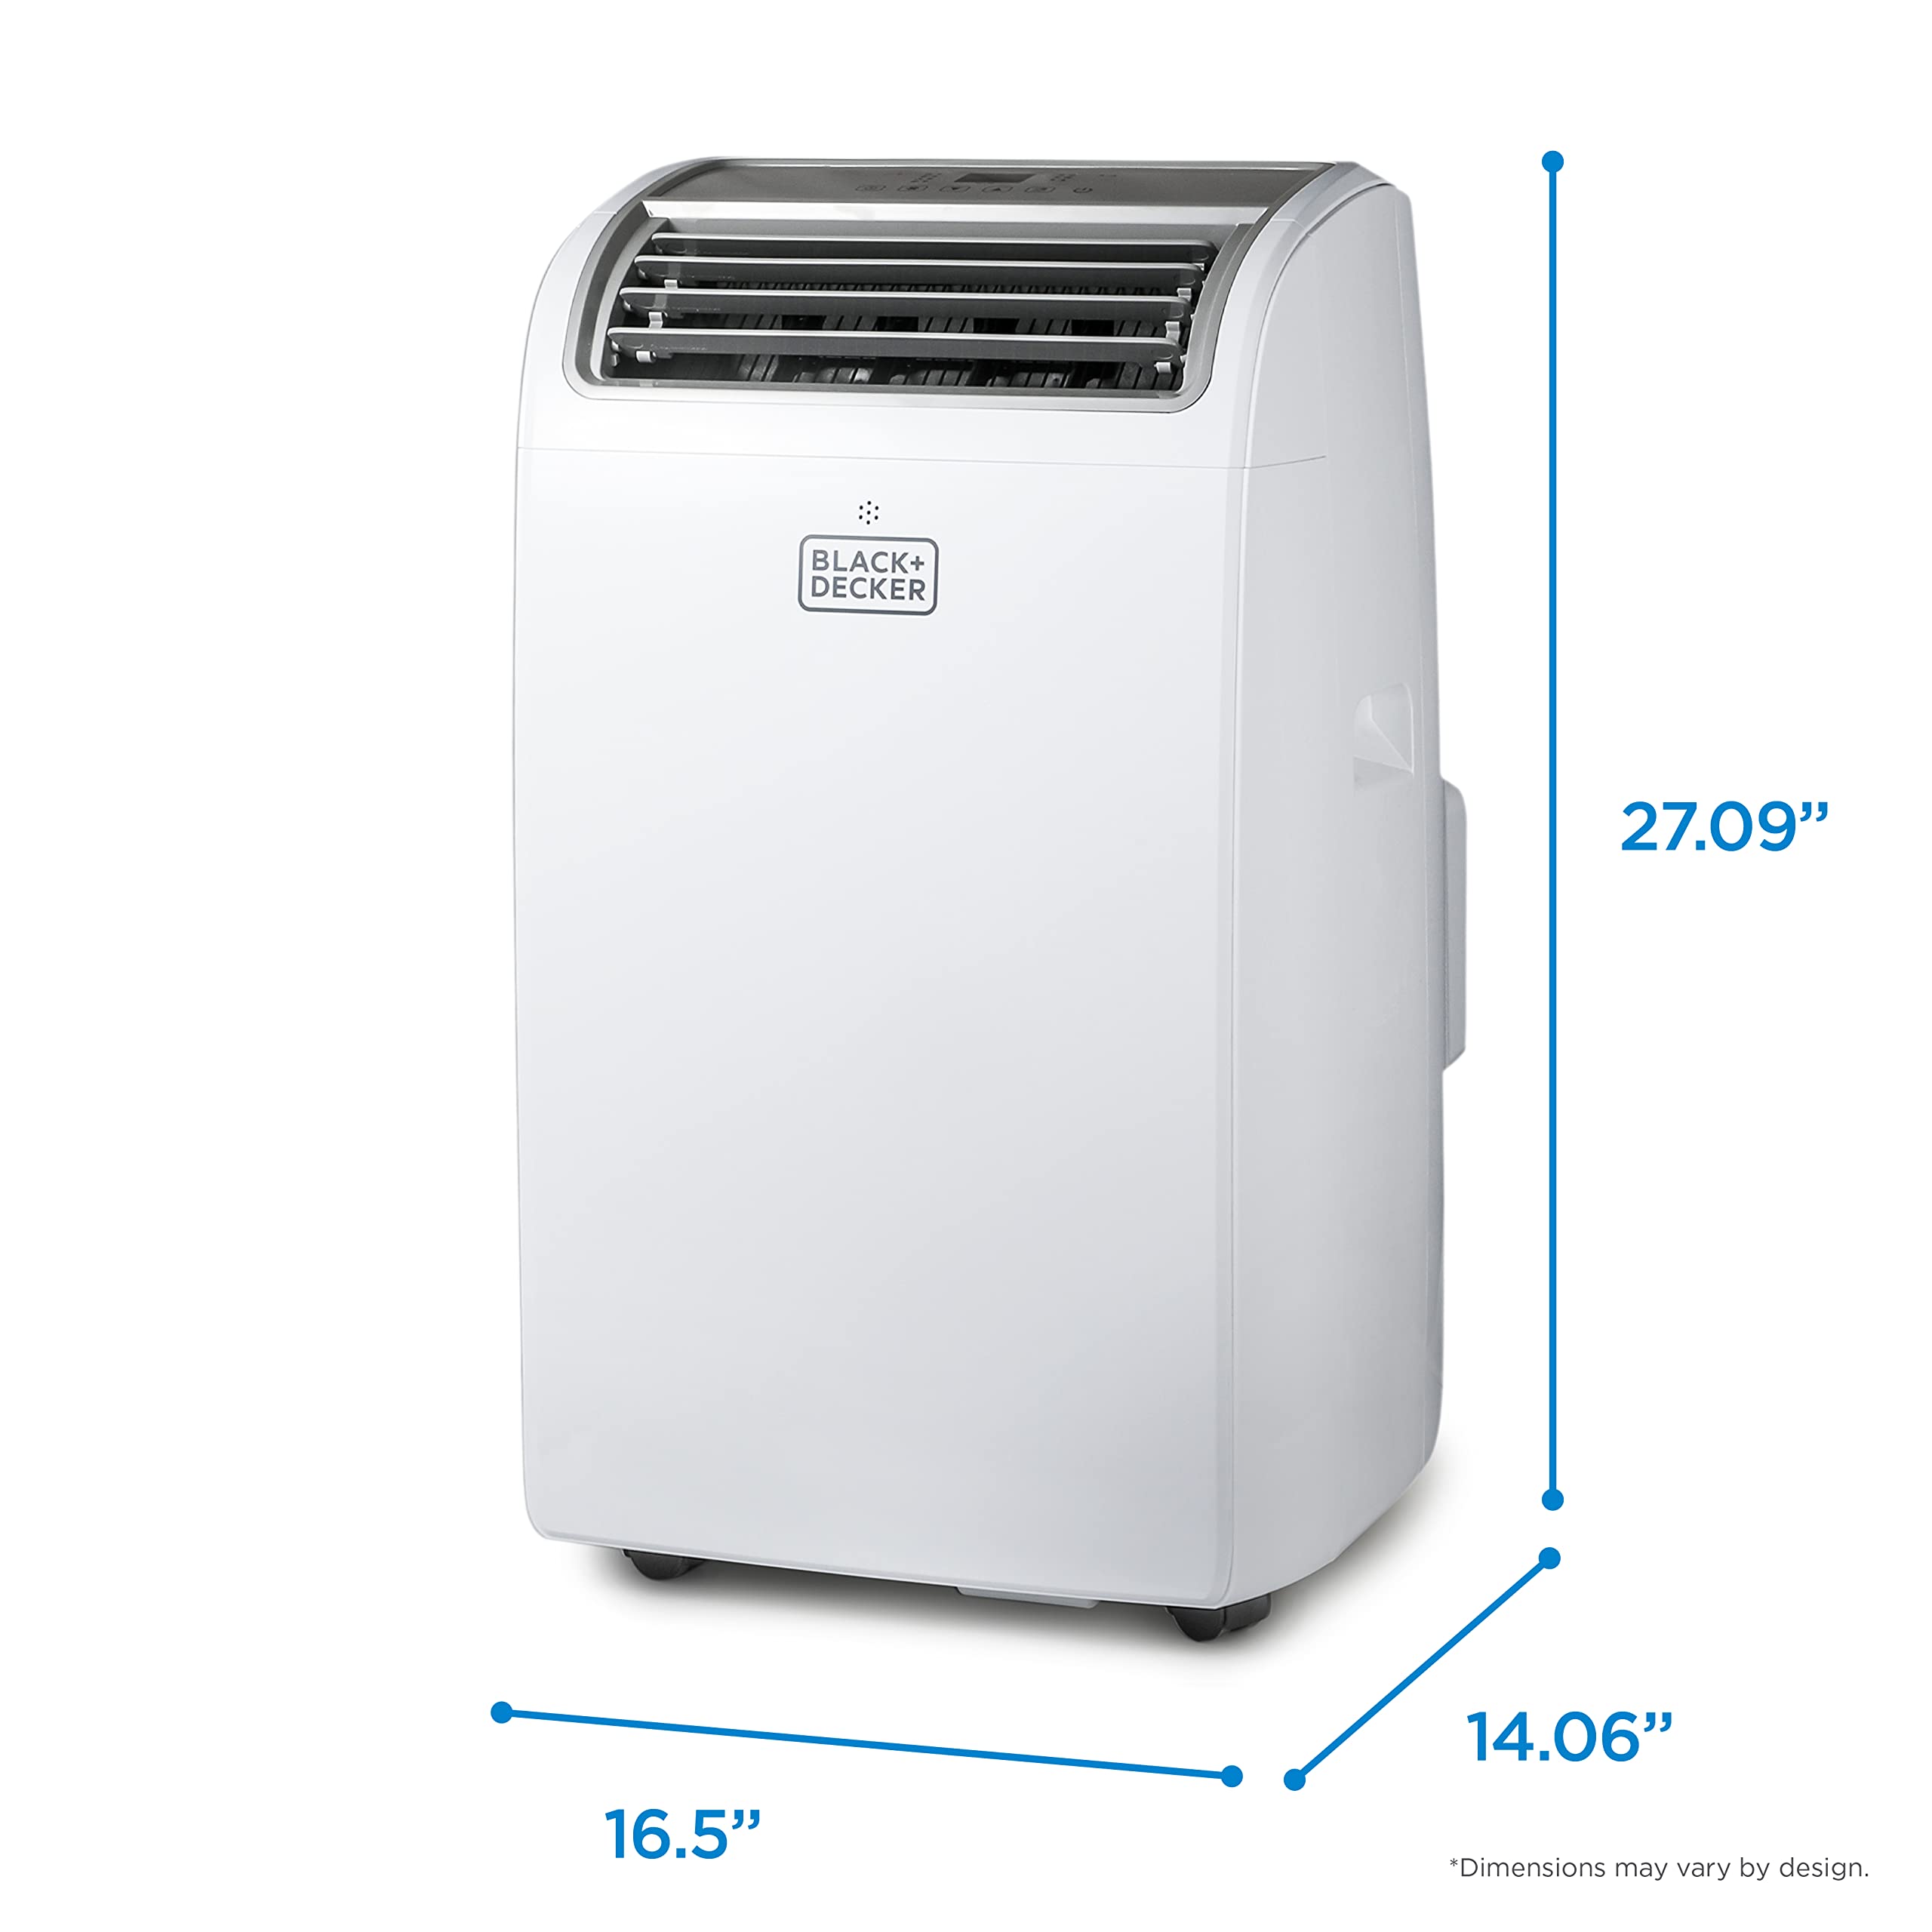 BLACK+DECKER 12,000 BTU Portable Air Conditioner up to 550 Sq.Ft. with Remote Control, White